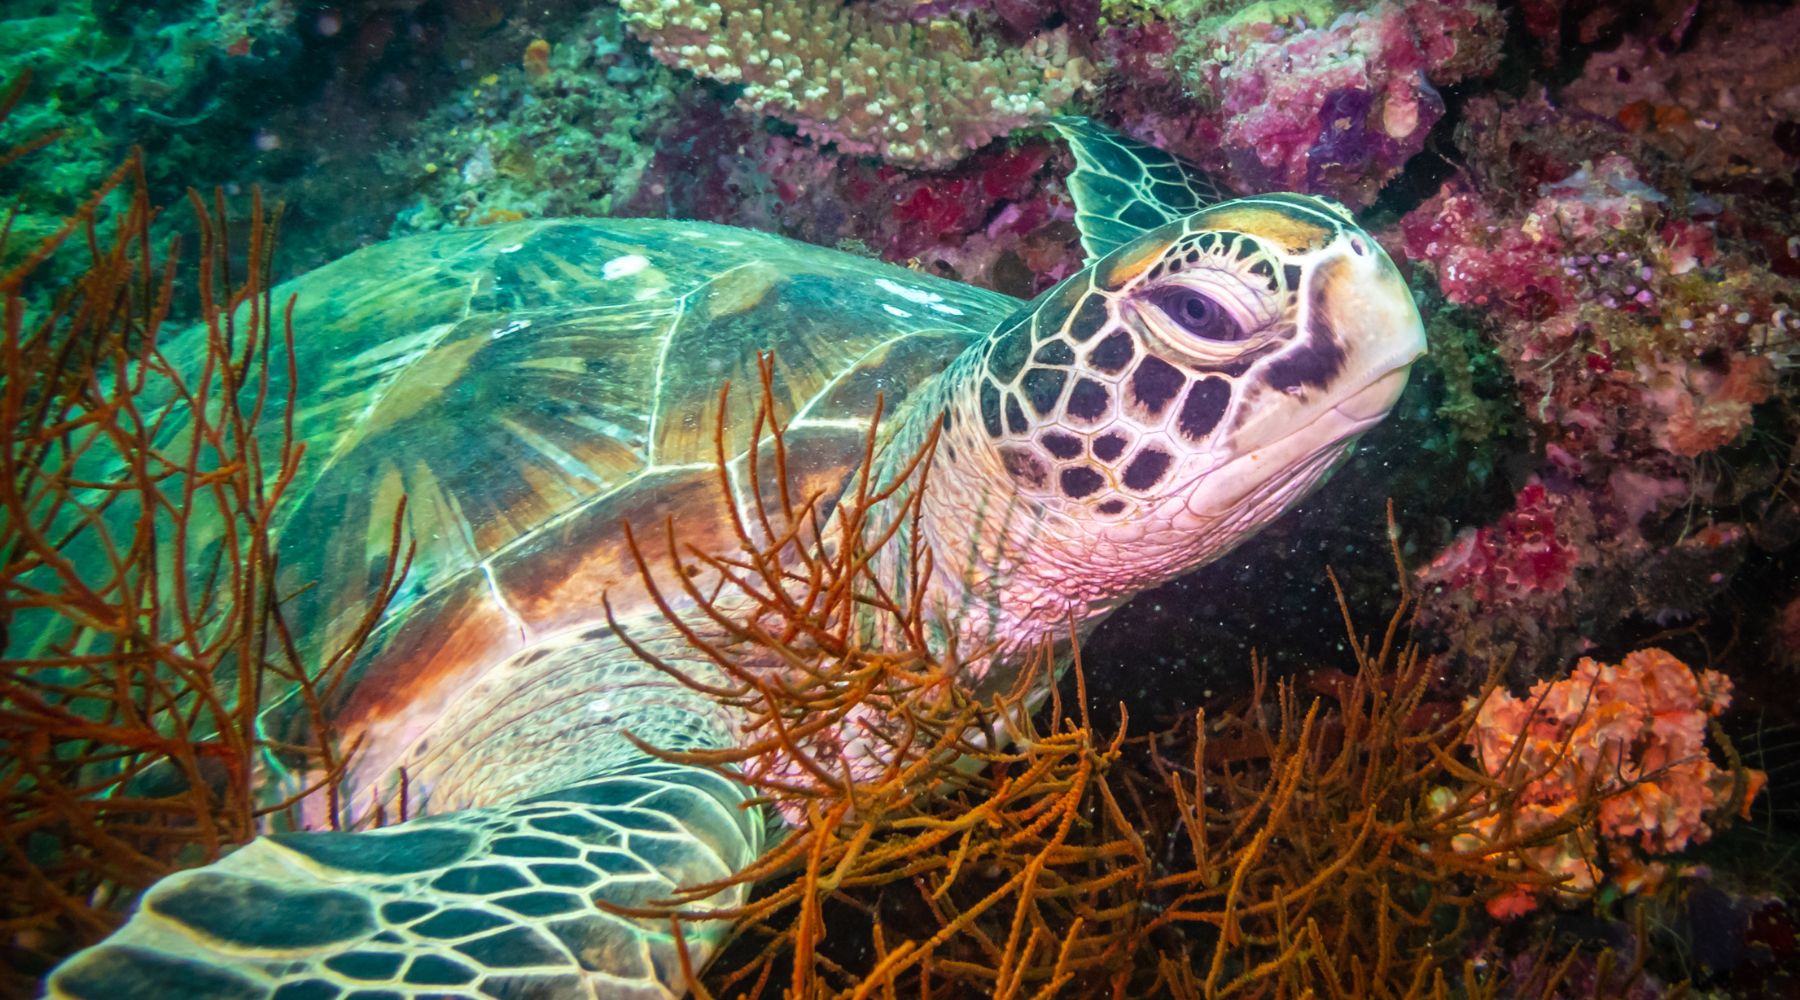 1,2,3,4,5,6,7,8,9,10 Important Facinating Facts About Sea Turtles You Didn't Know - Forever Wildlife